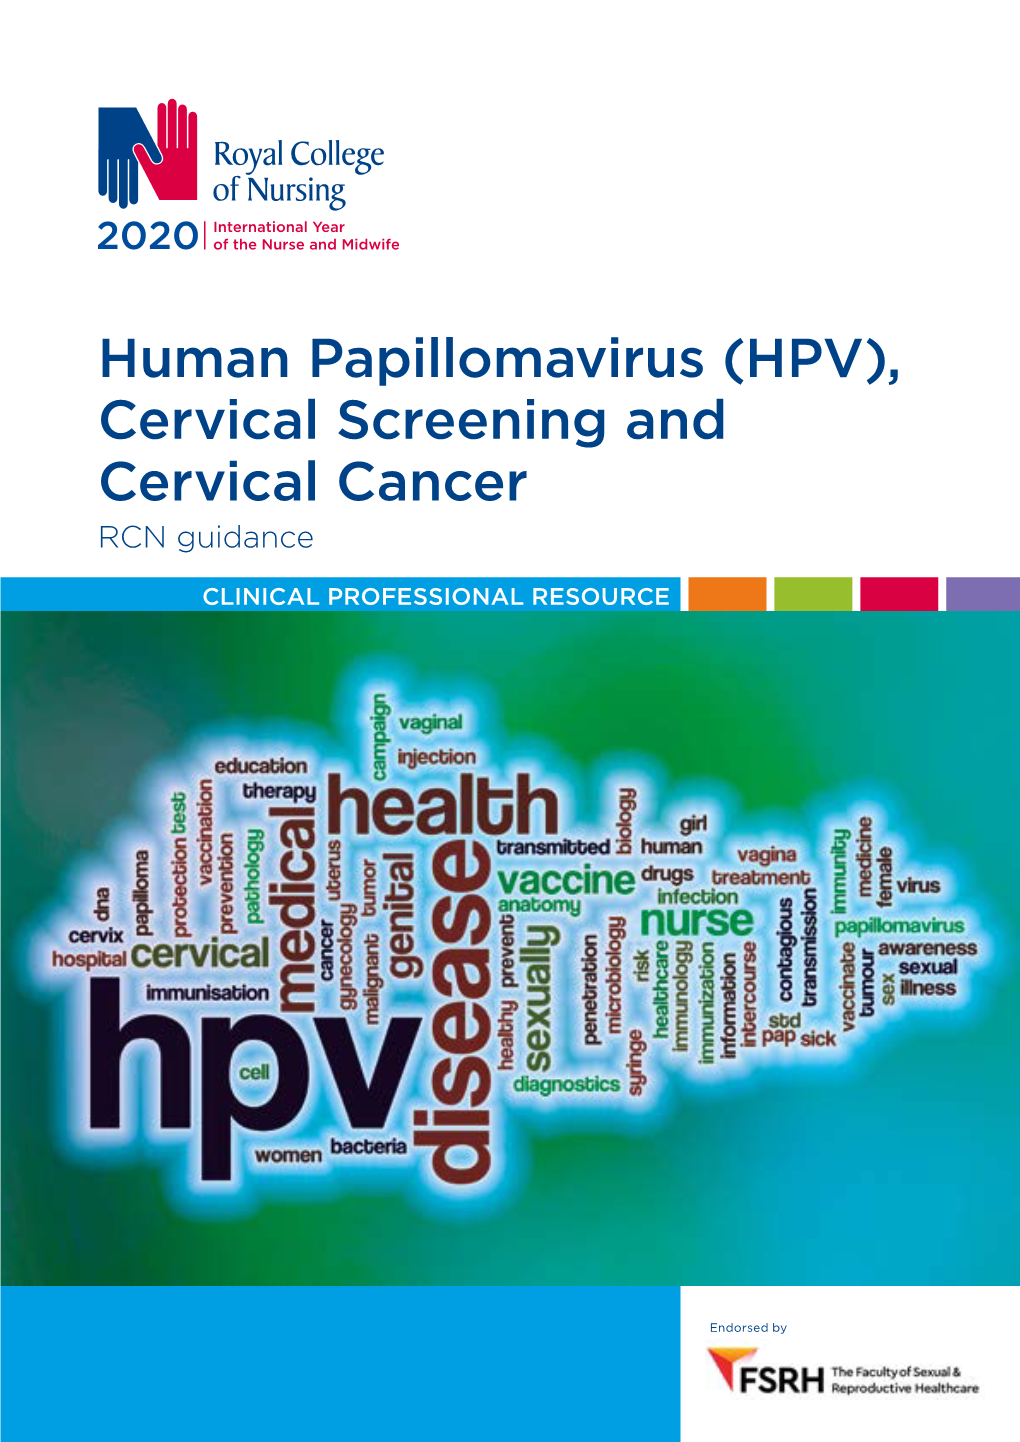 (HPV), Cervical Screening and Cervical Cancer RCN Guidance